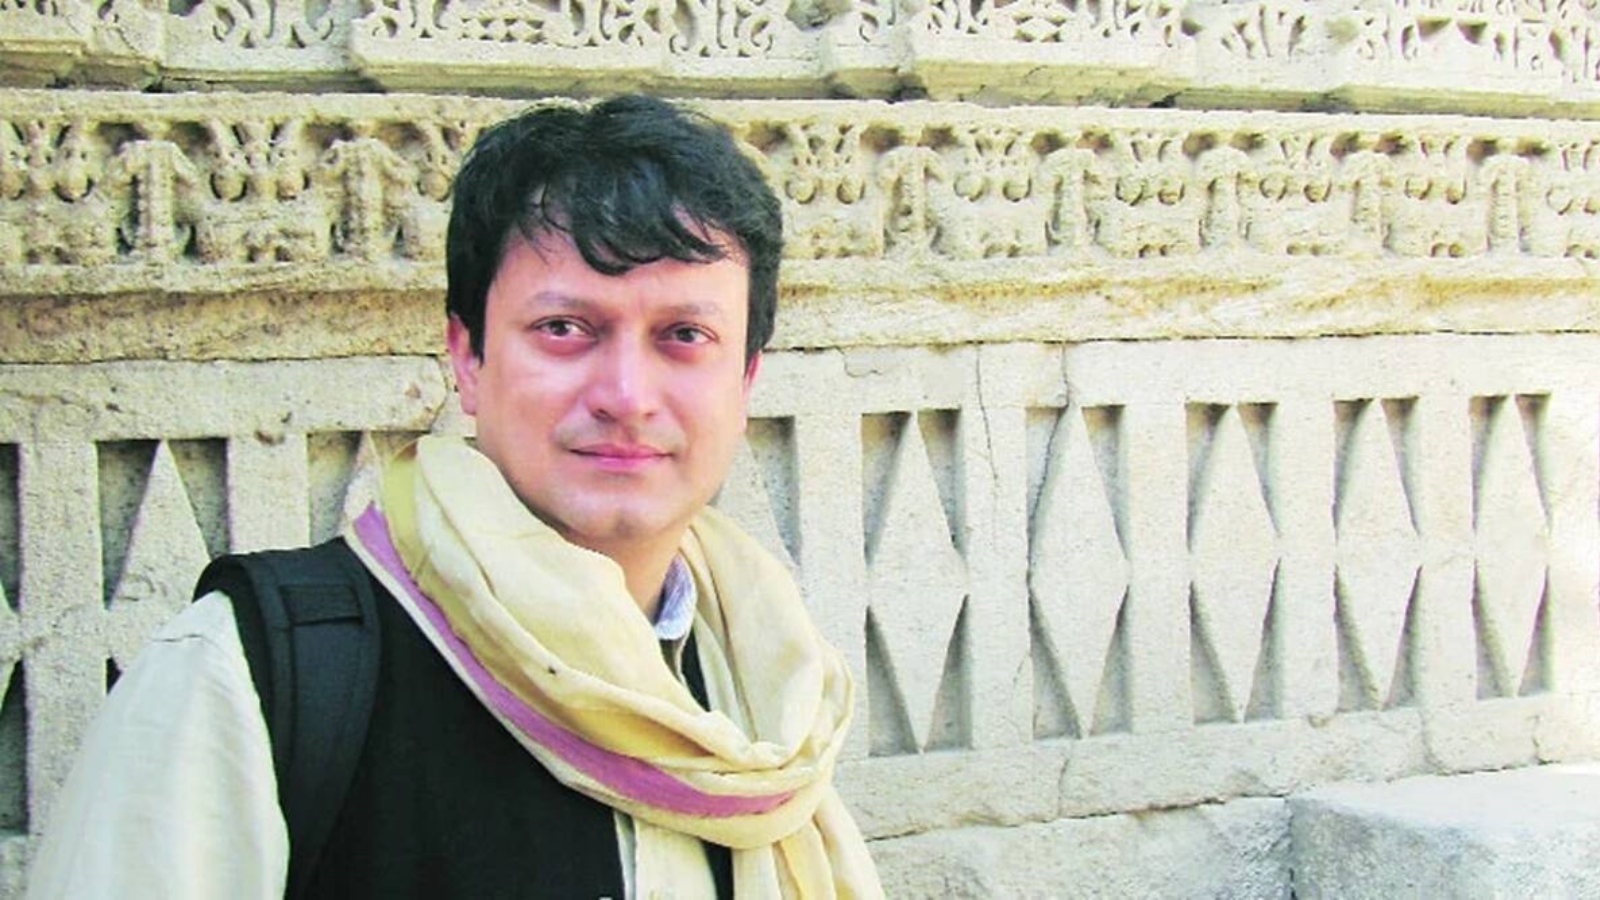 ranjit-hoskote-quits-panel-over-anti-semitic-letter-he-signed-in-2019